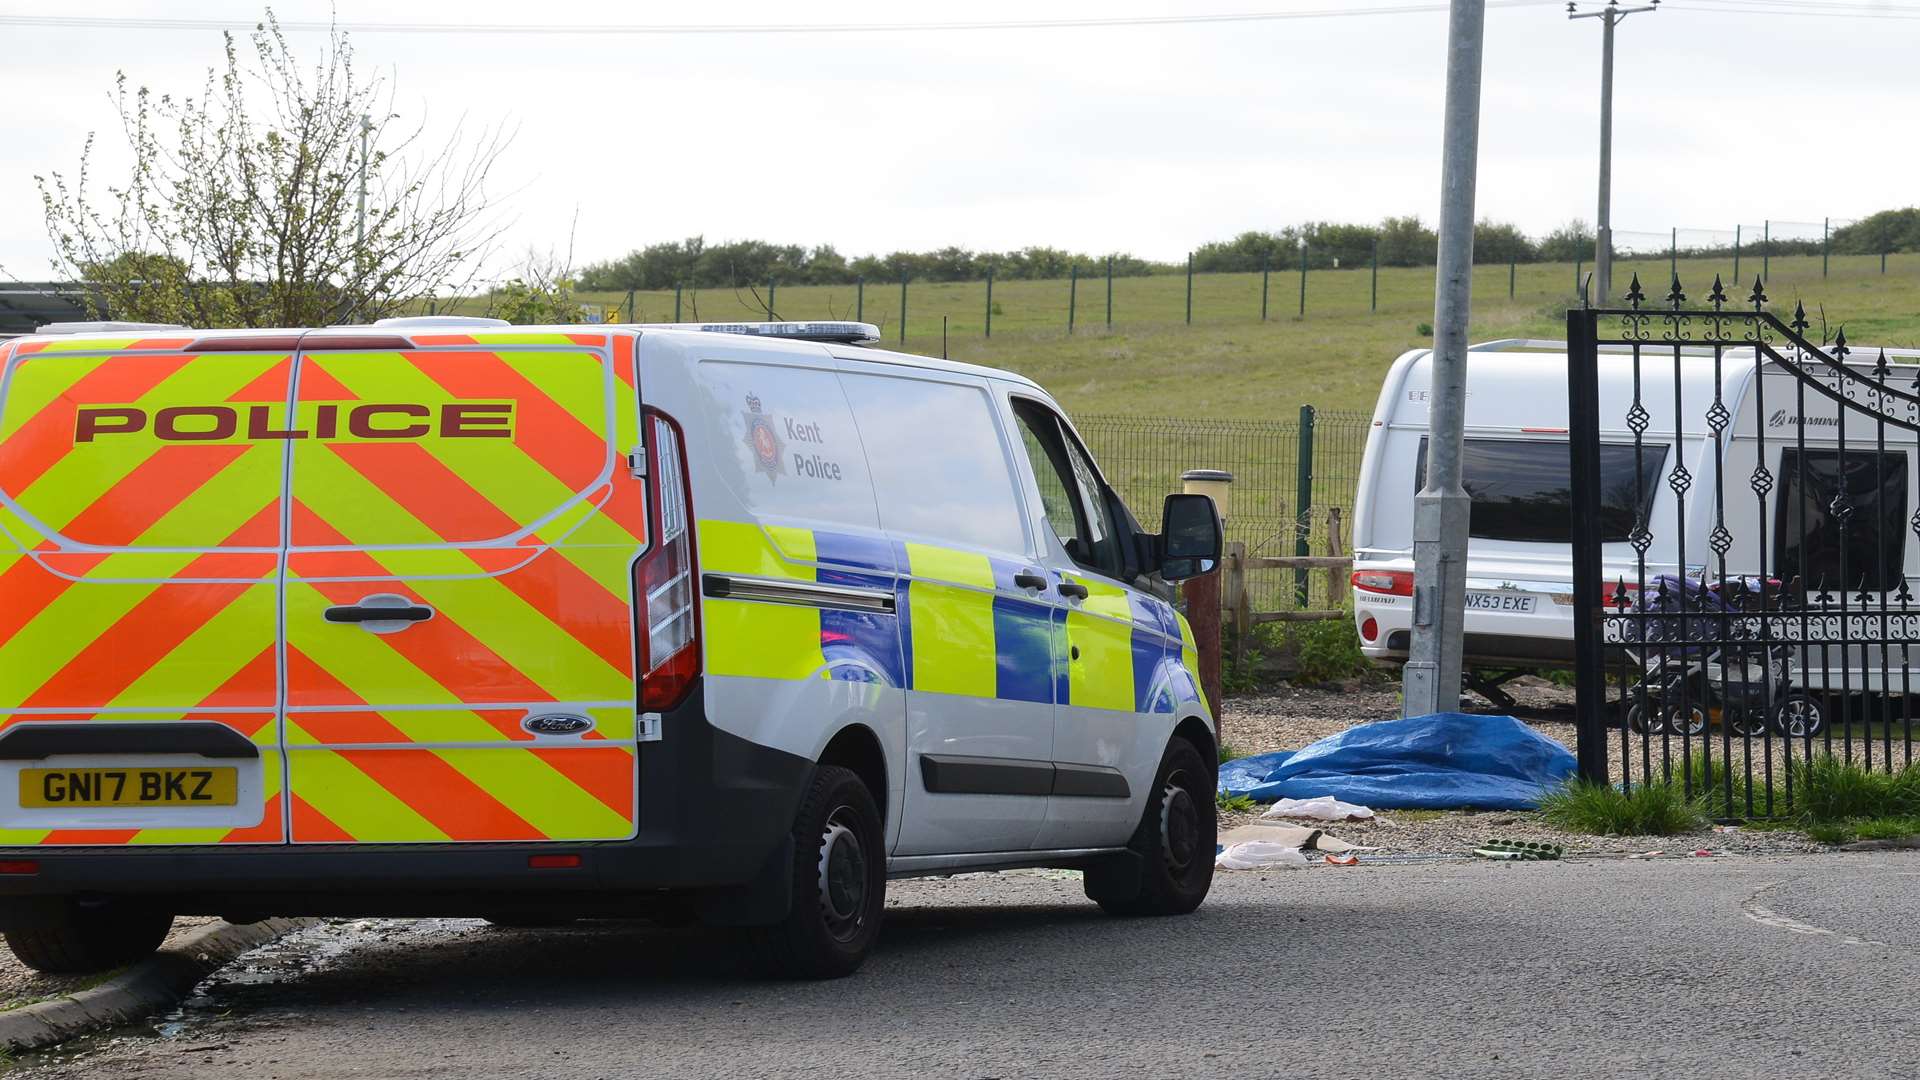 Police and the council took part in raid at Prospect Farm